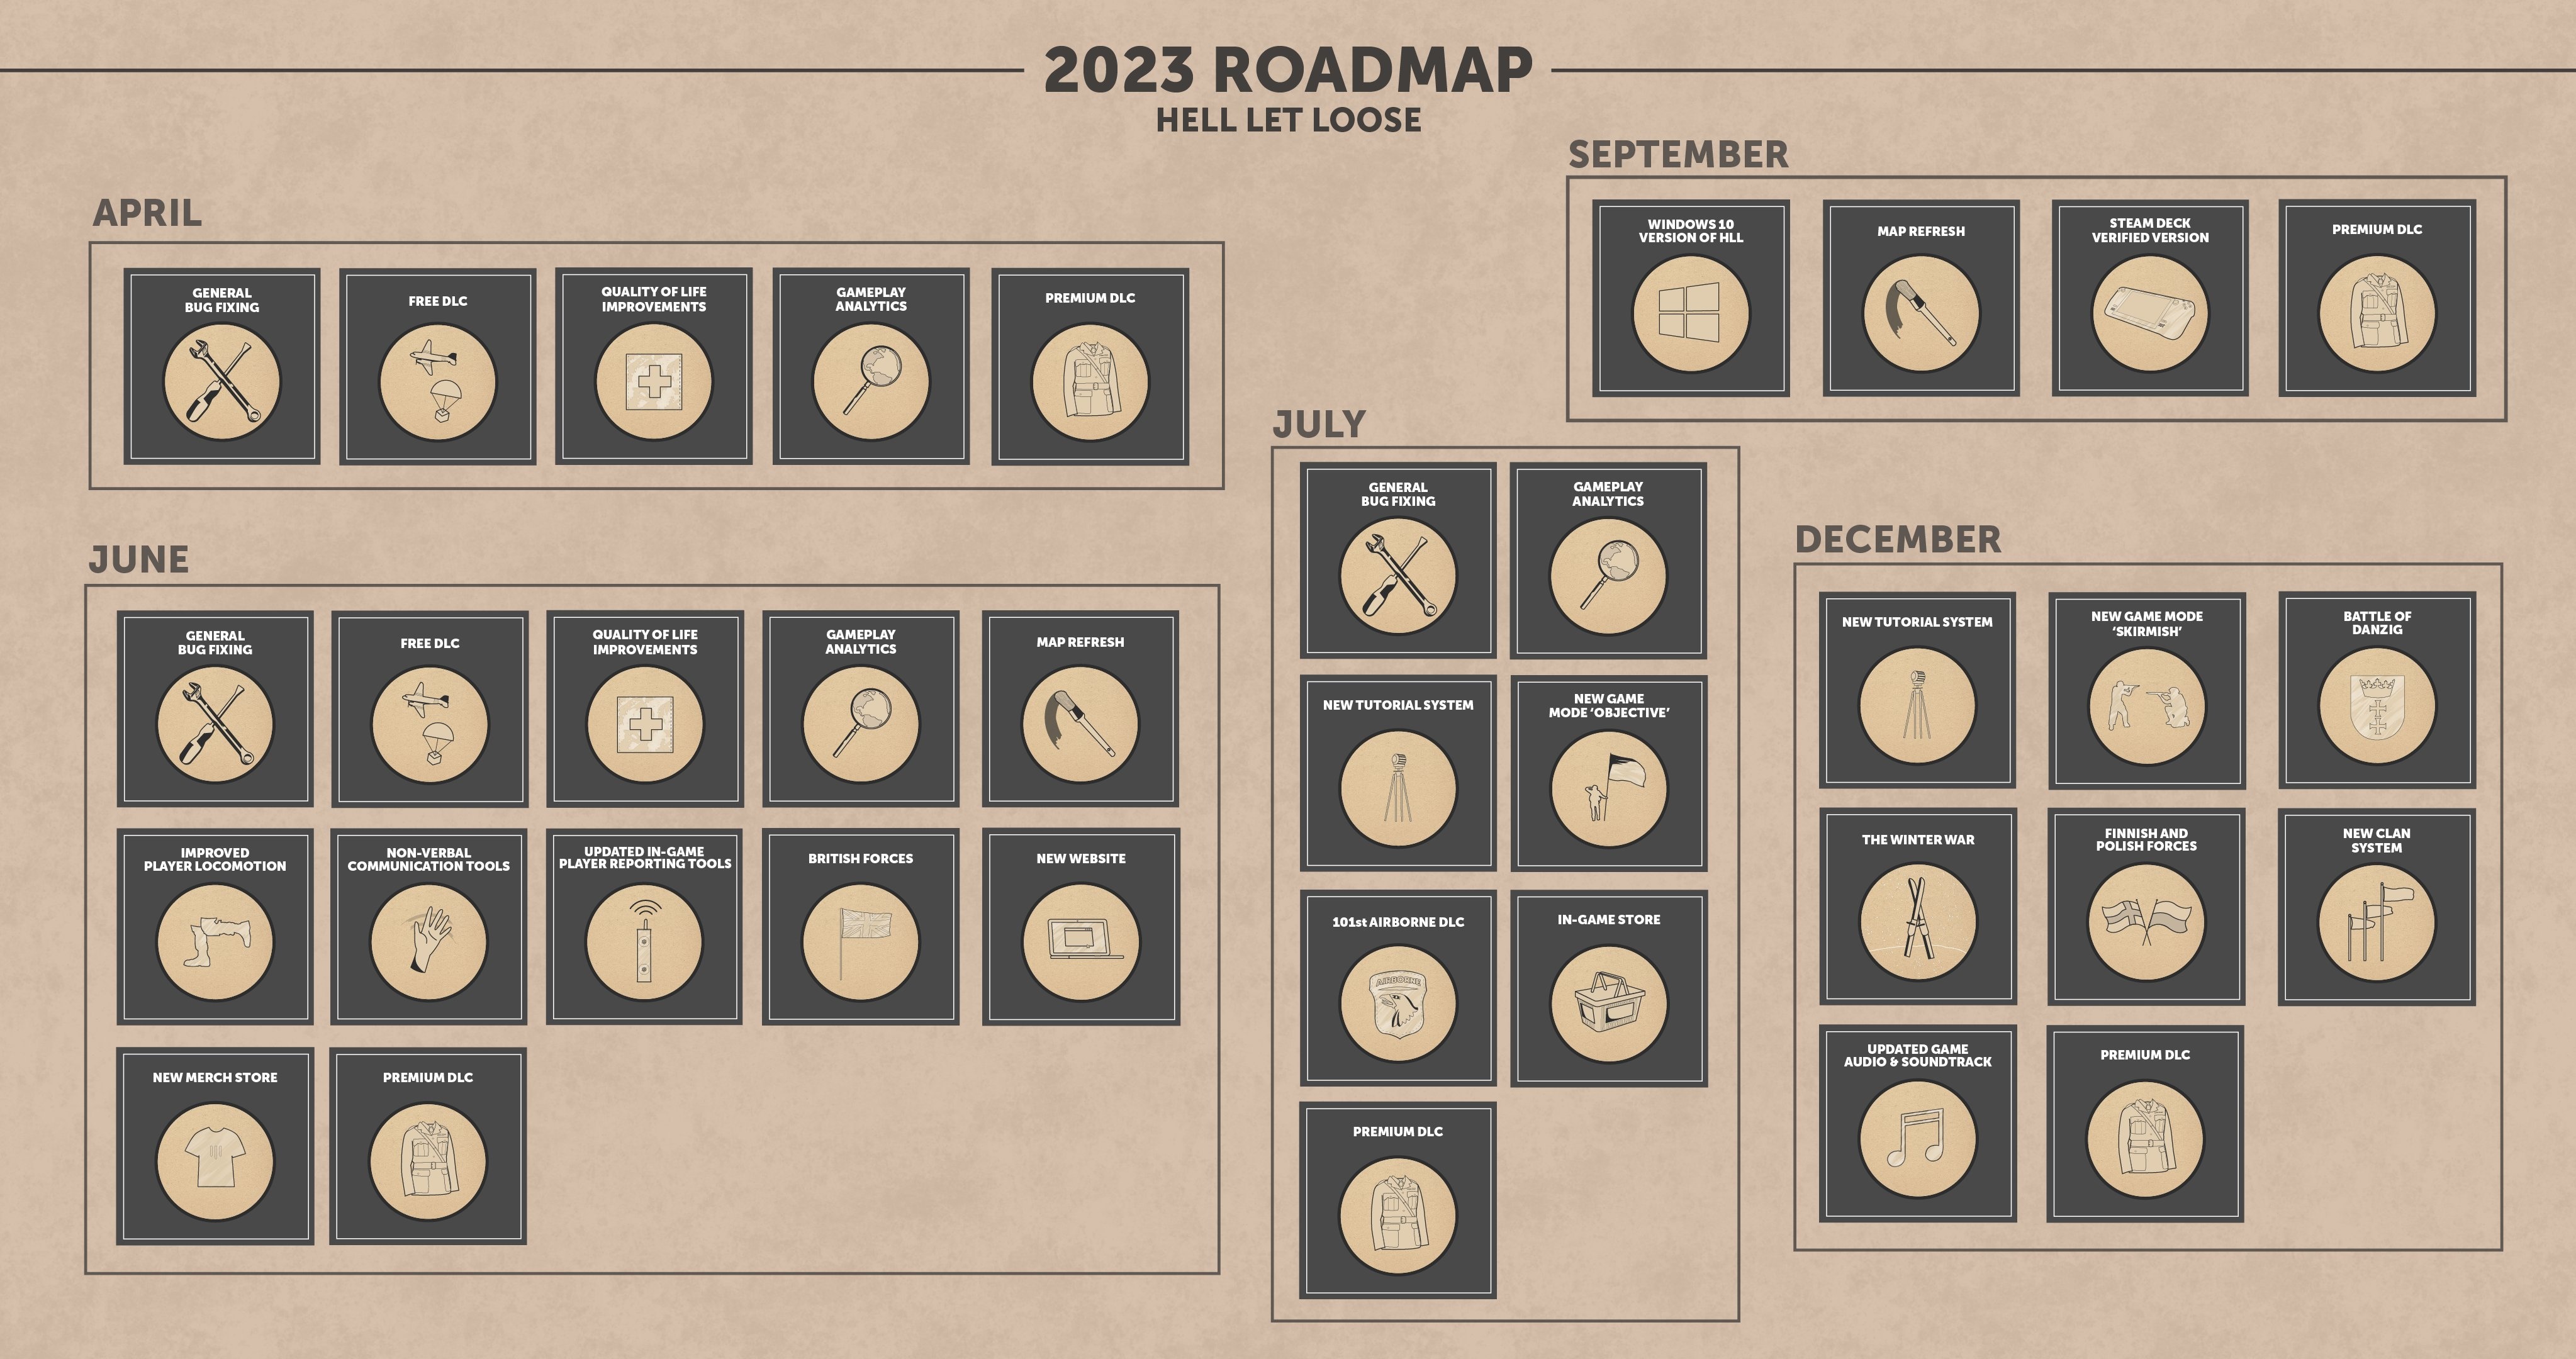 (The roadmap for 2023 promises a lot.)